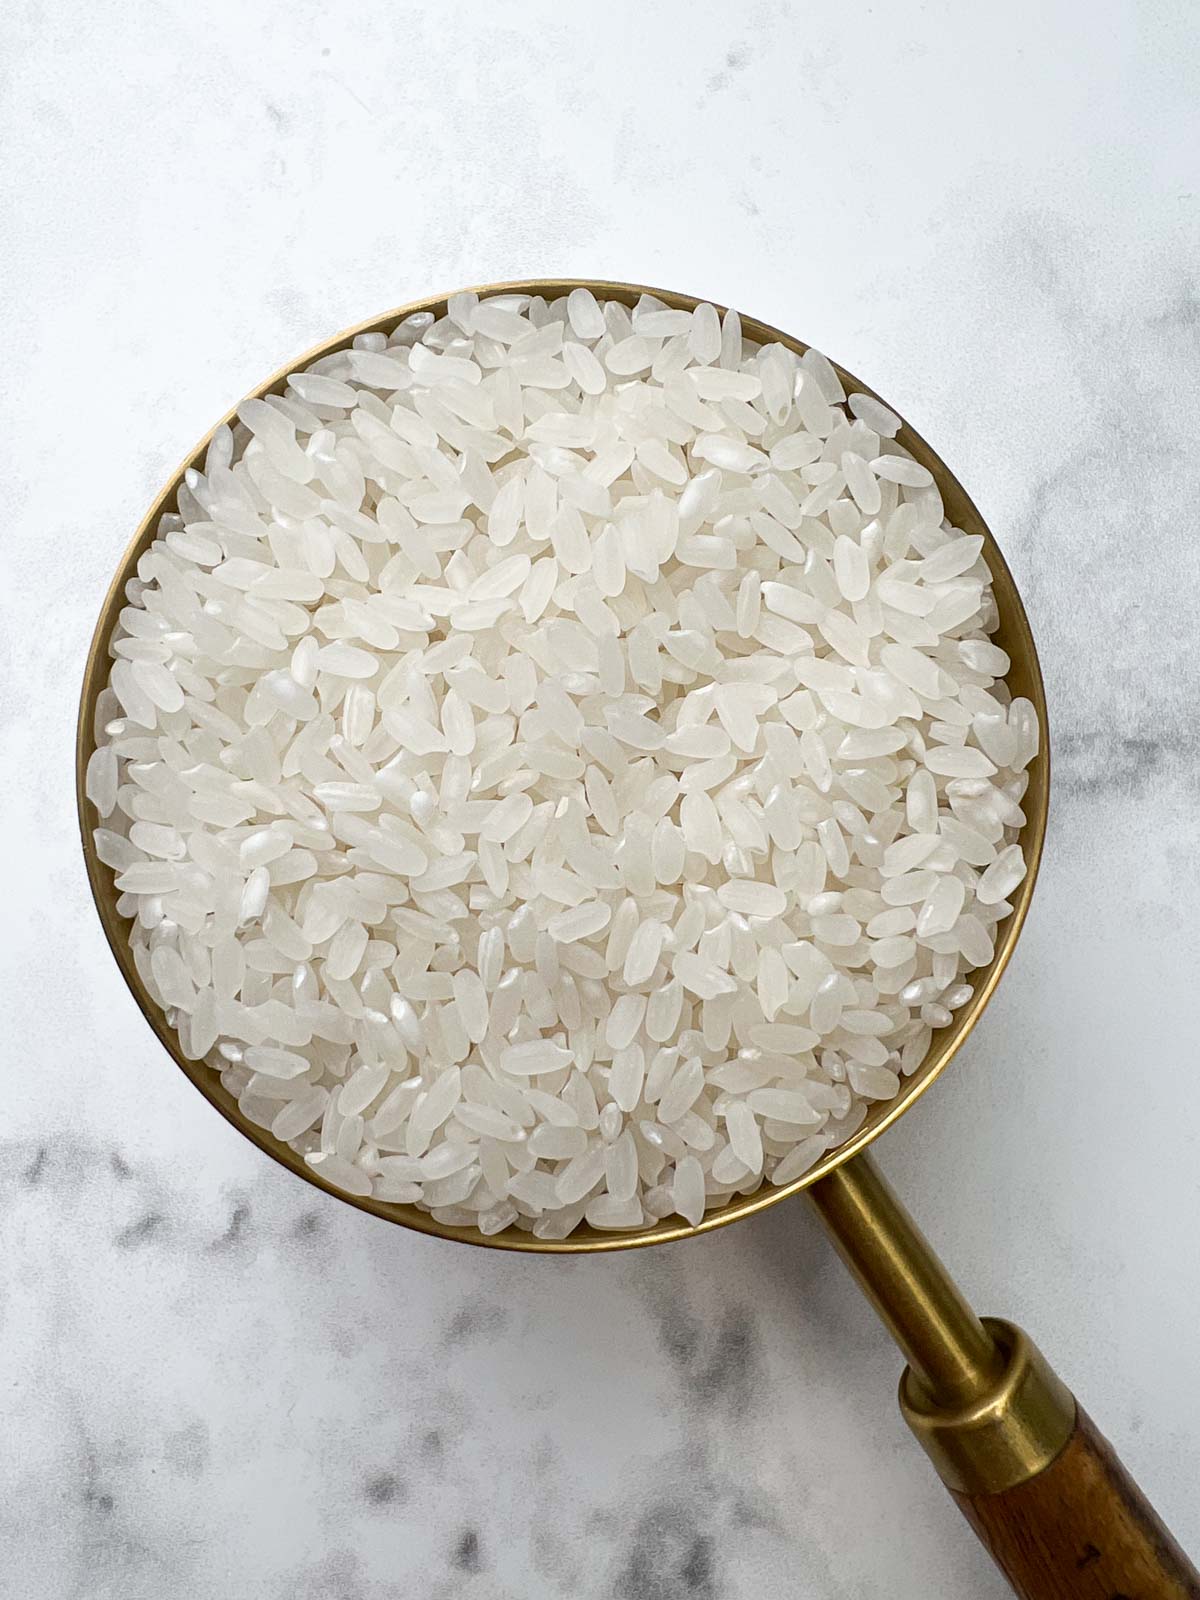 dry calrose rice in a measuring cup